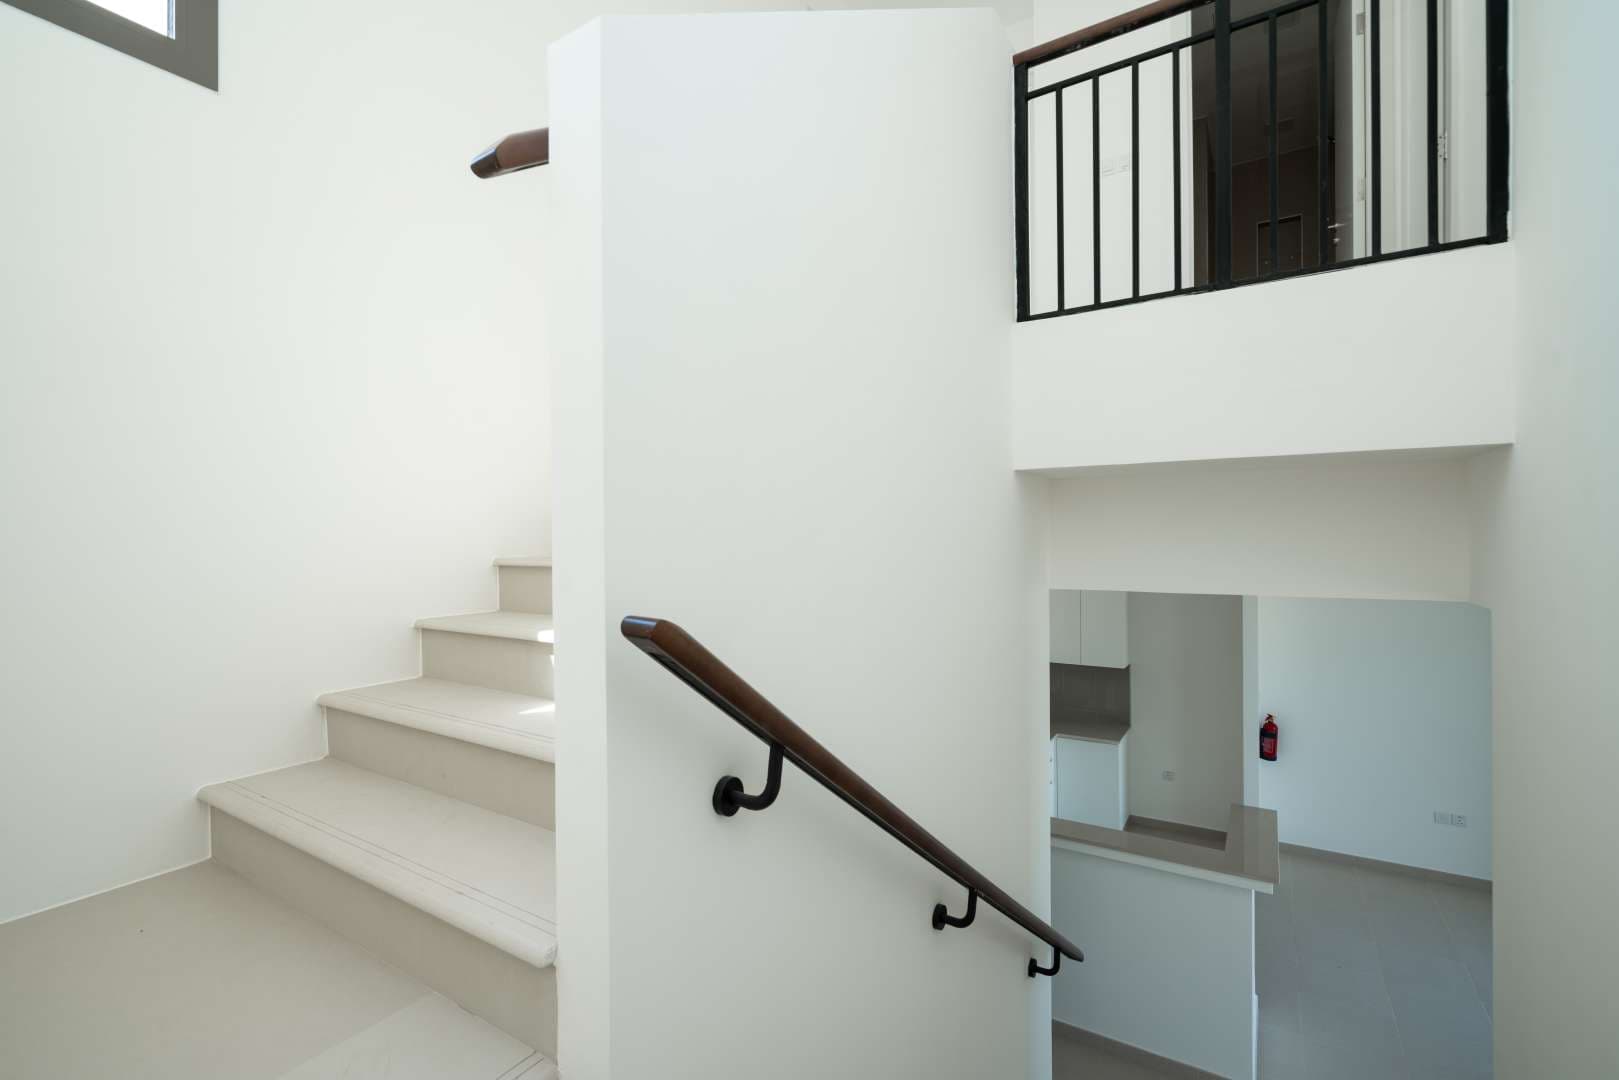 3 Bedroom Townhouse For Rent Zahra Townhouses Lp05539 1fa9f403c6986100.jpg